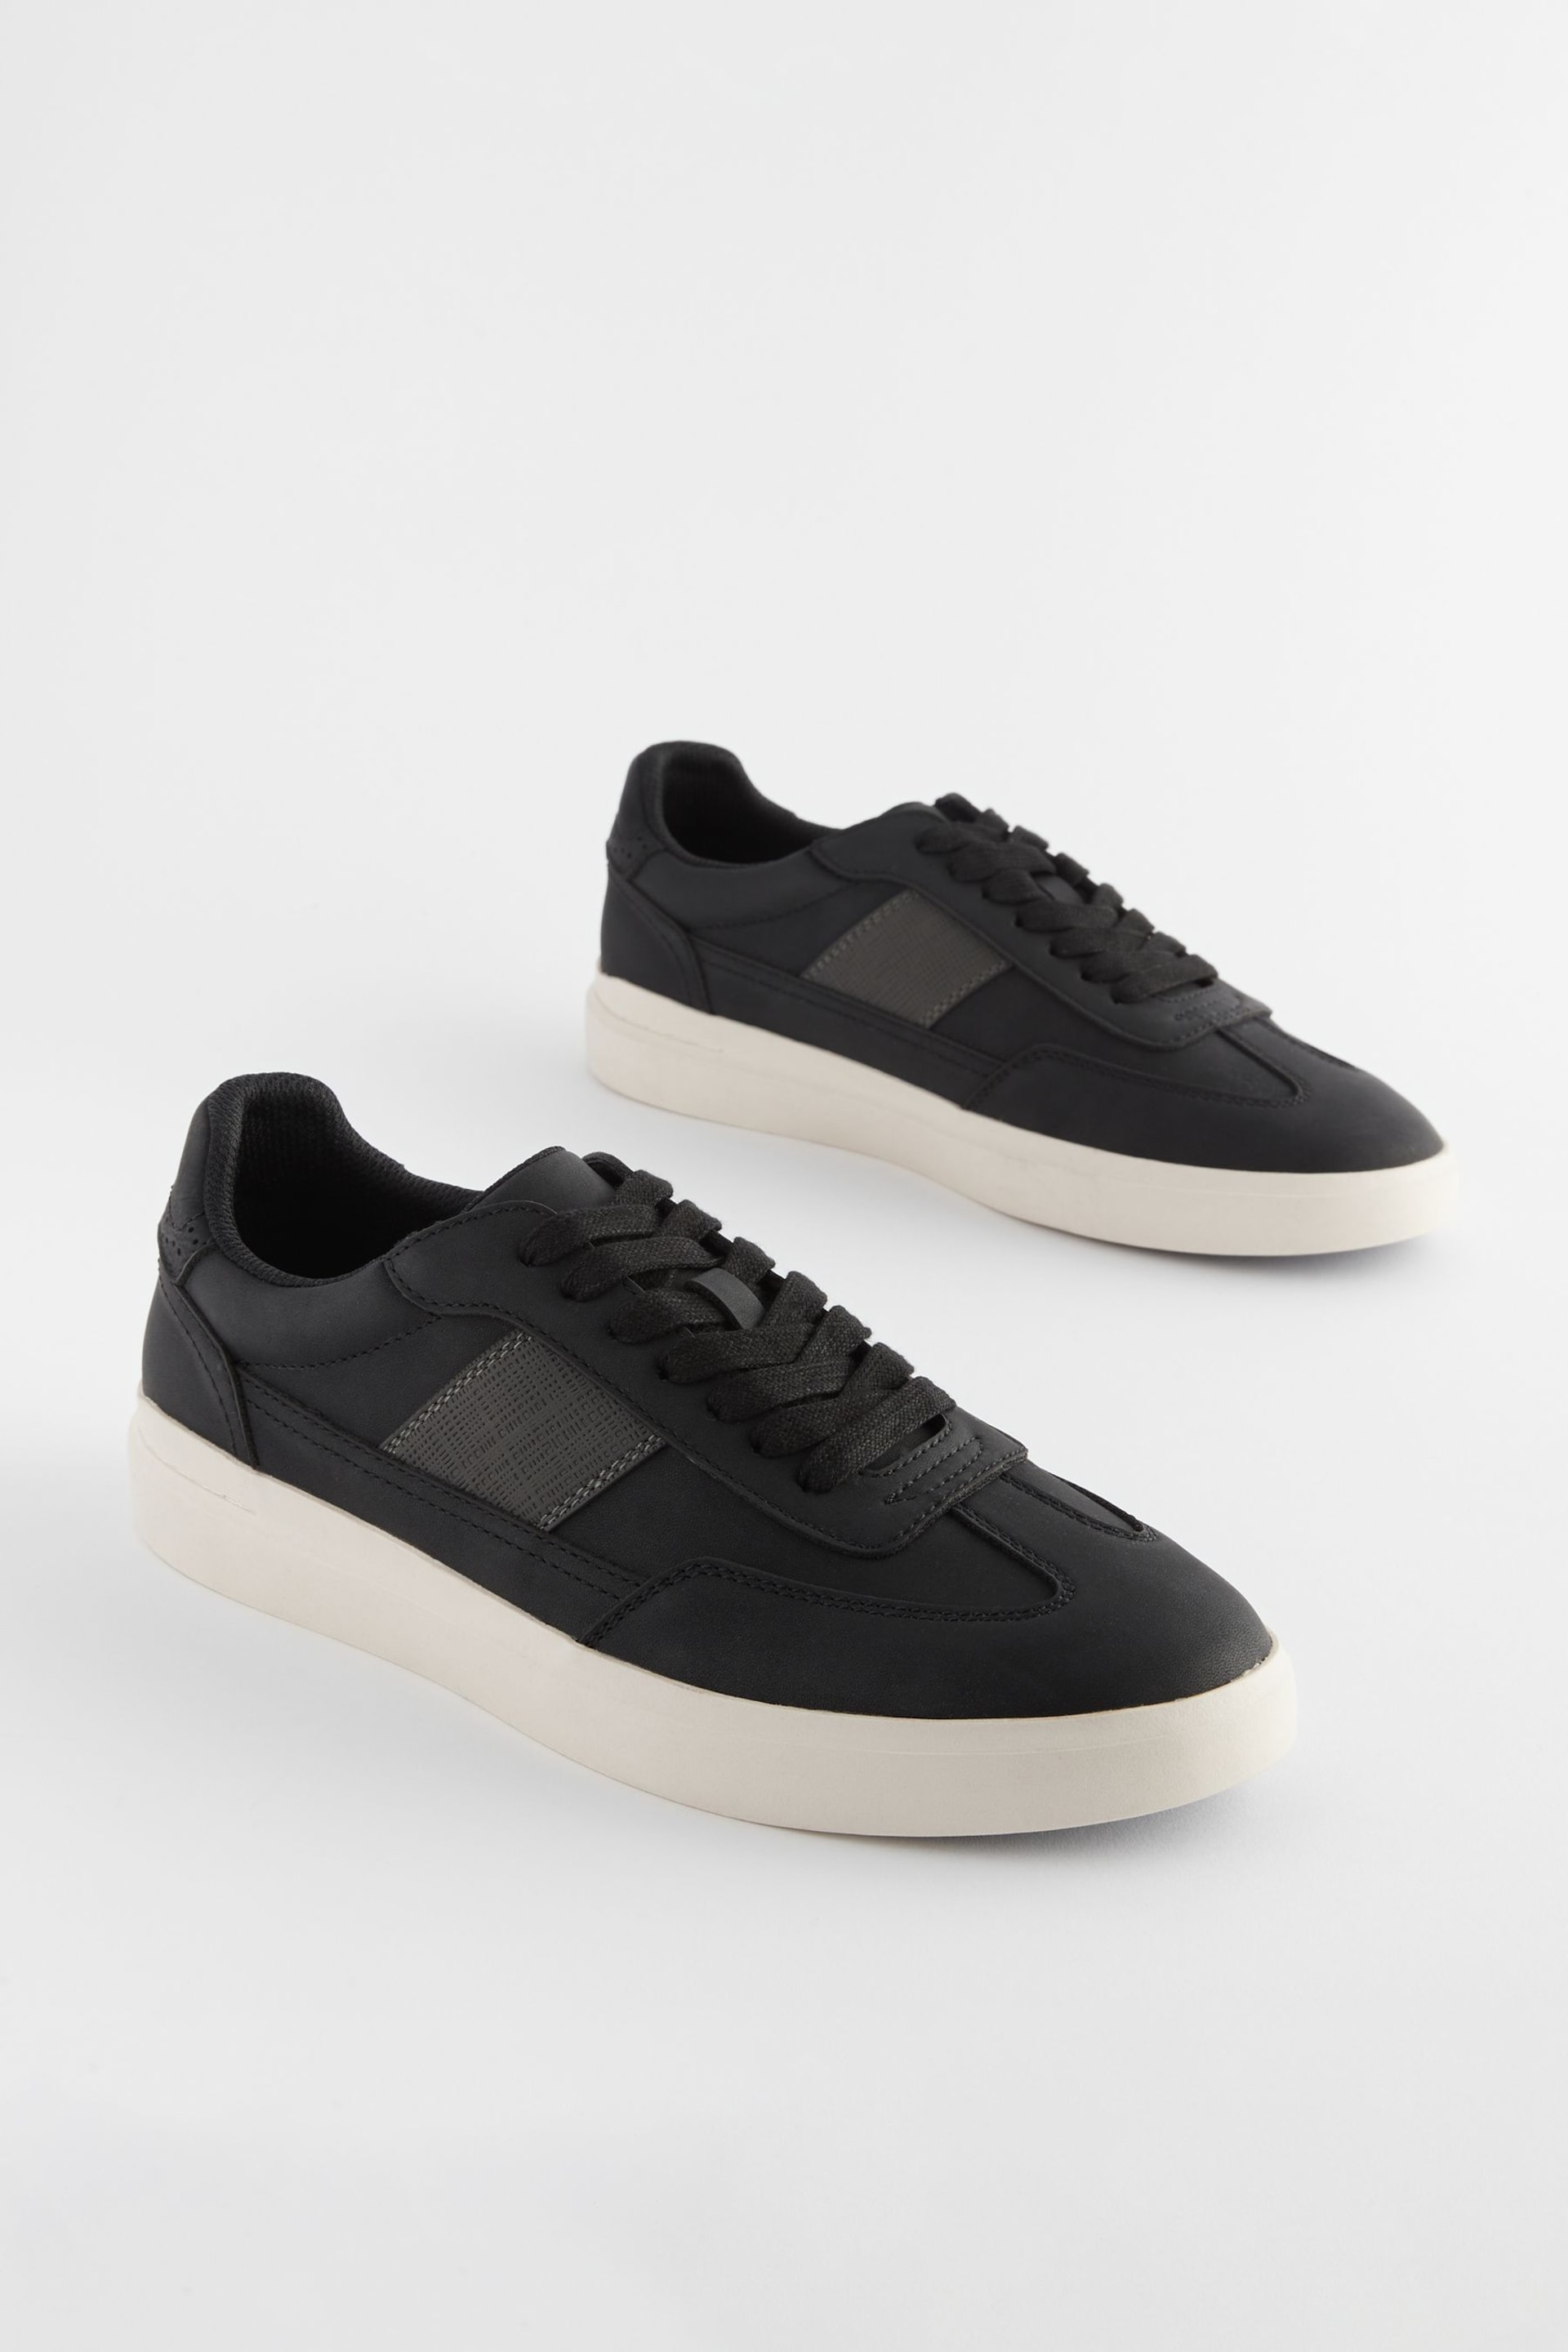 Black Smart Trainers - Image 2 of 7